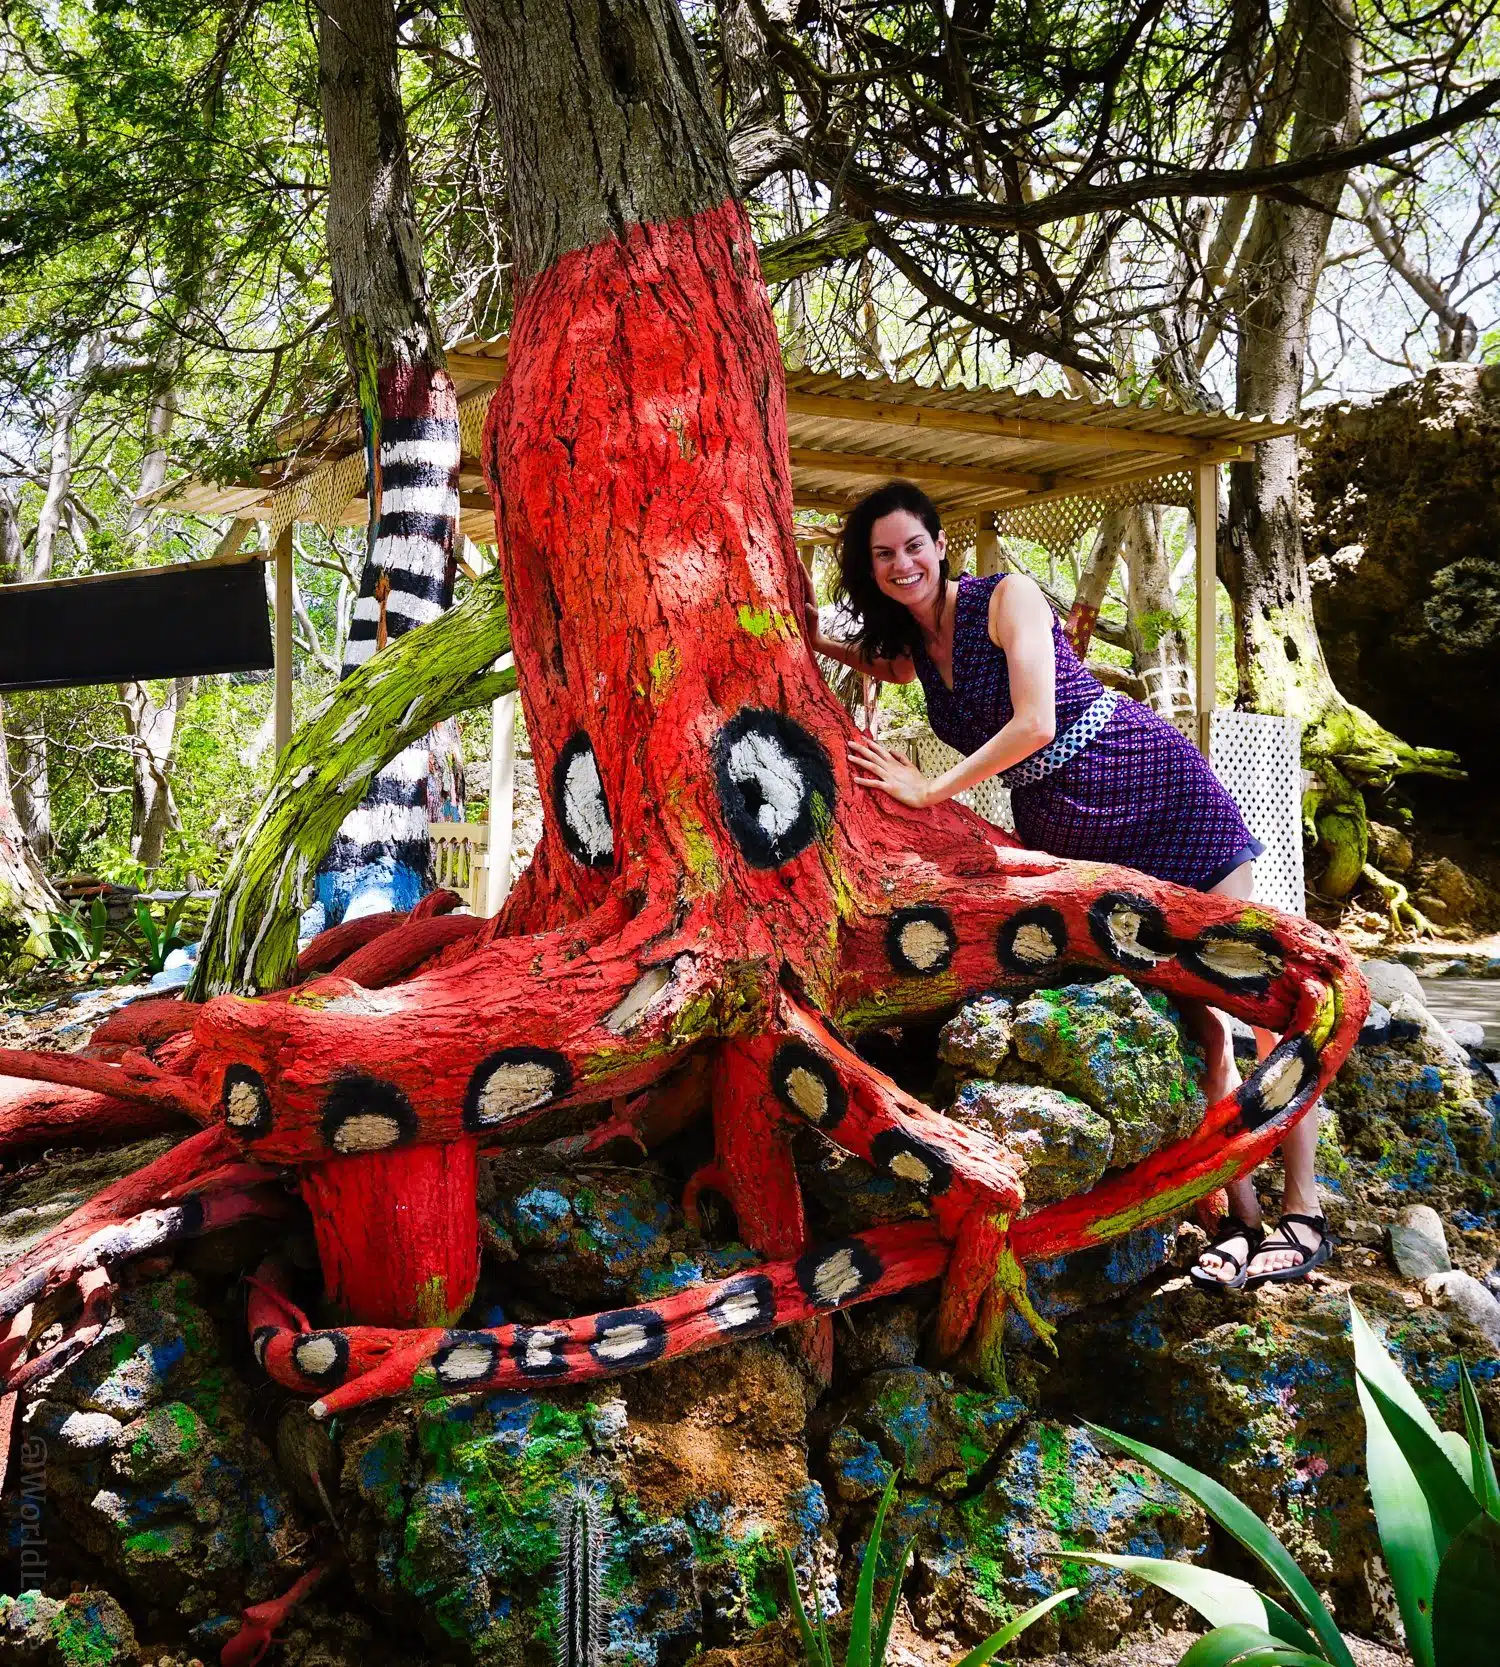 I loved this octopus tree! Curaçao rocks out public art!